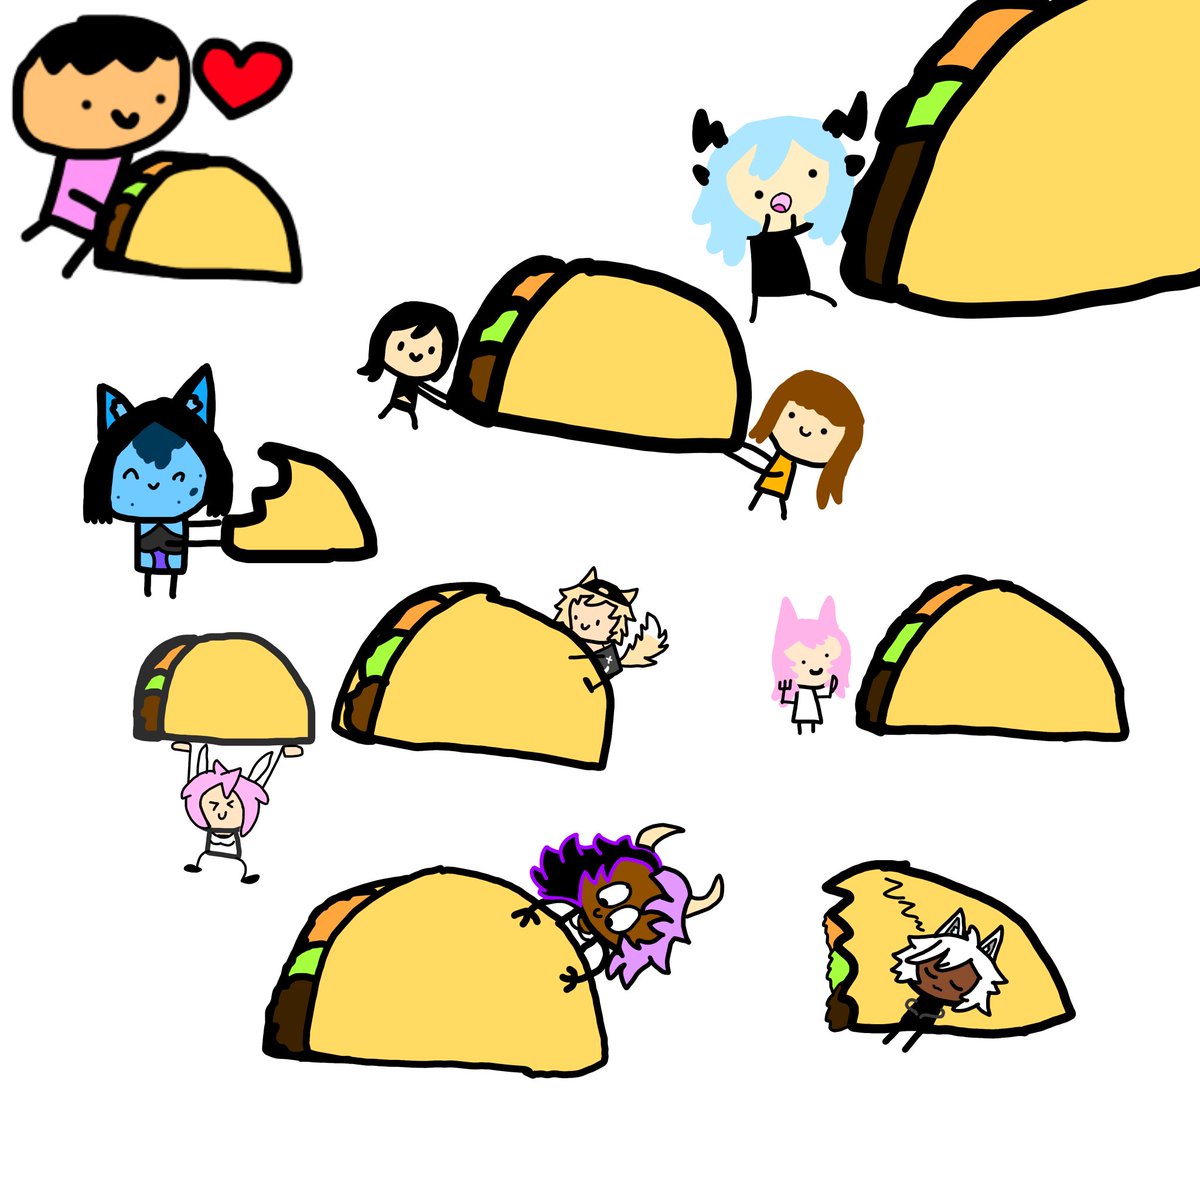 Today is Cinco de Mayo! What better way to celebrate than to eat tacos with my friends!! Friends in Drawing @DragonSpit_ @ChonkyLotus @ArtemisMagi and @ApollaSpirit @SandStoneArtis1 @TaraKaminarito @Semienigma @MochiiMochiiVT And @sleepyriri